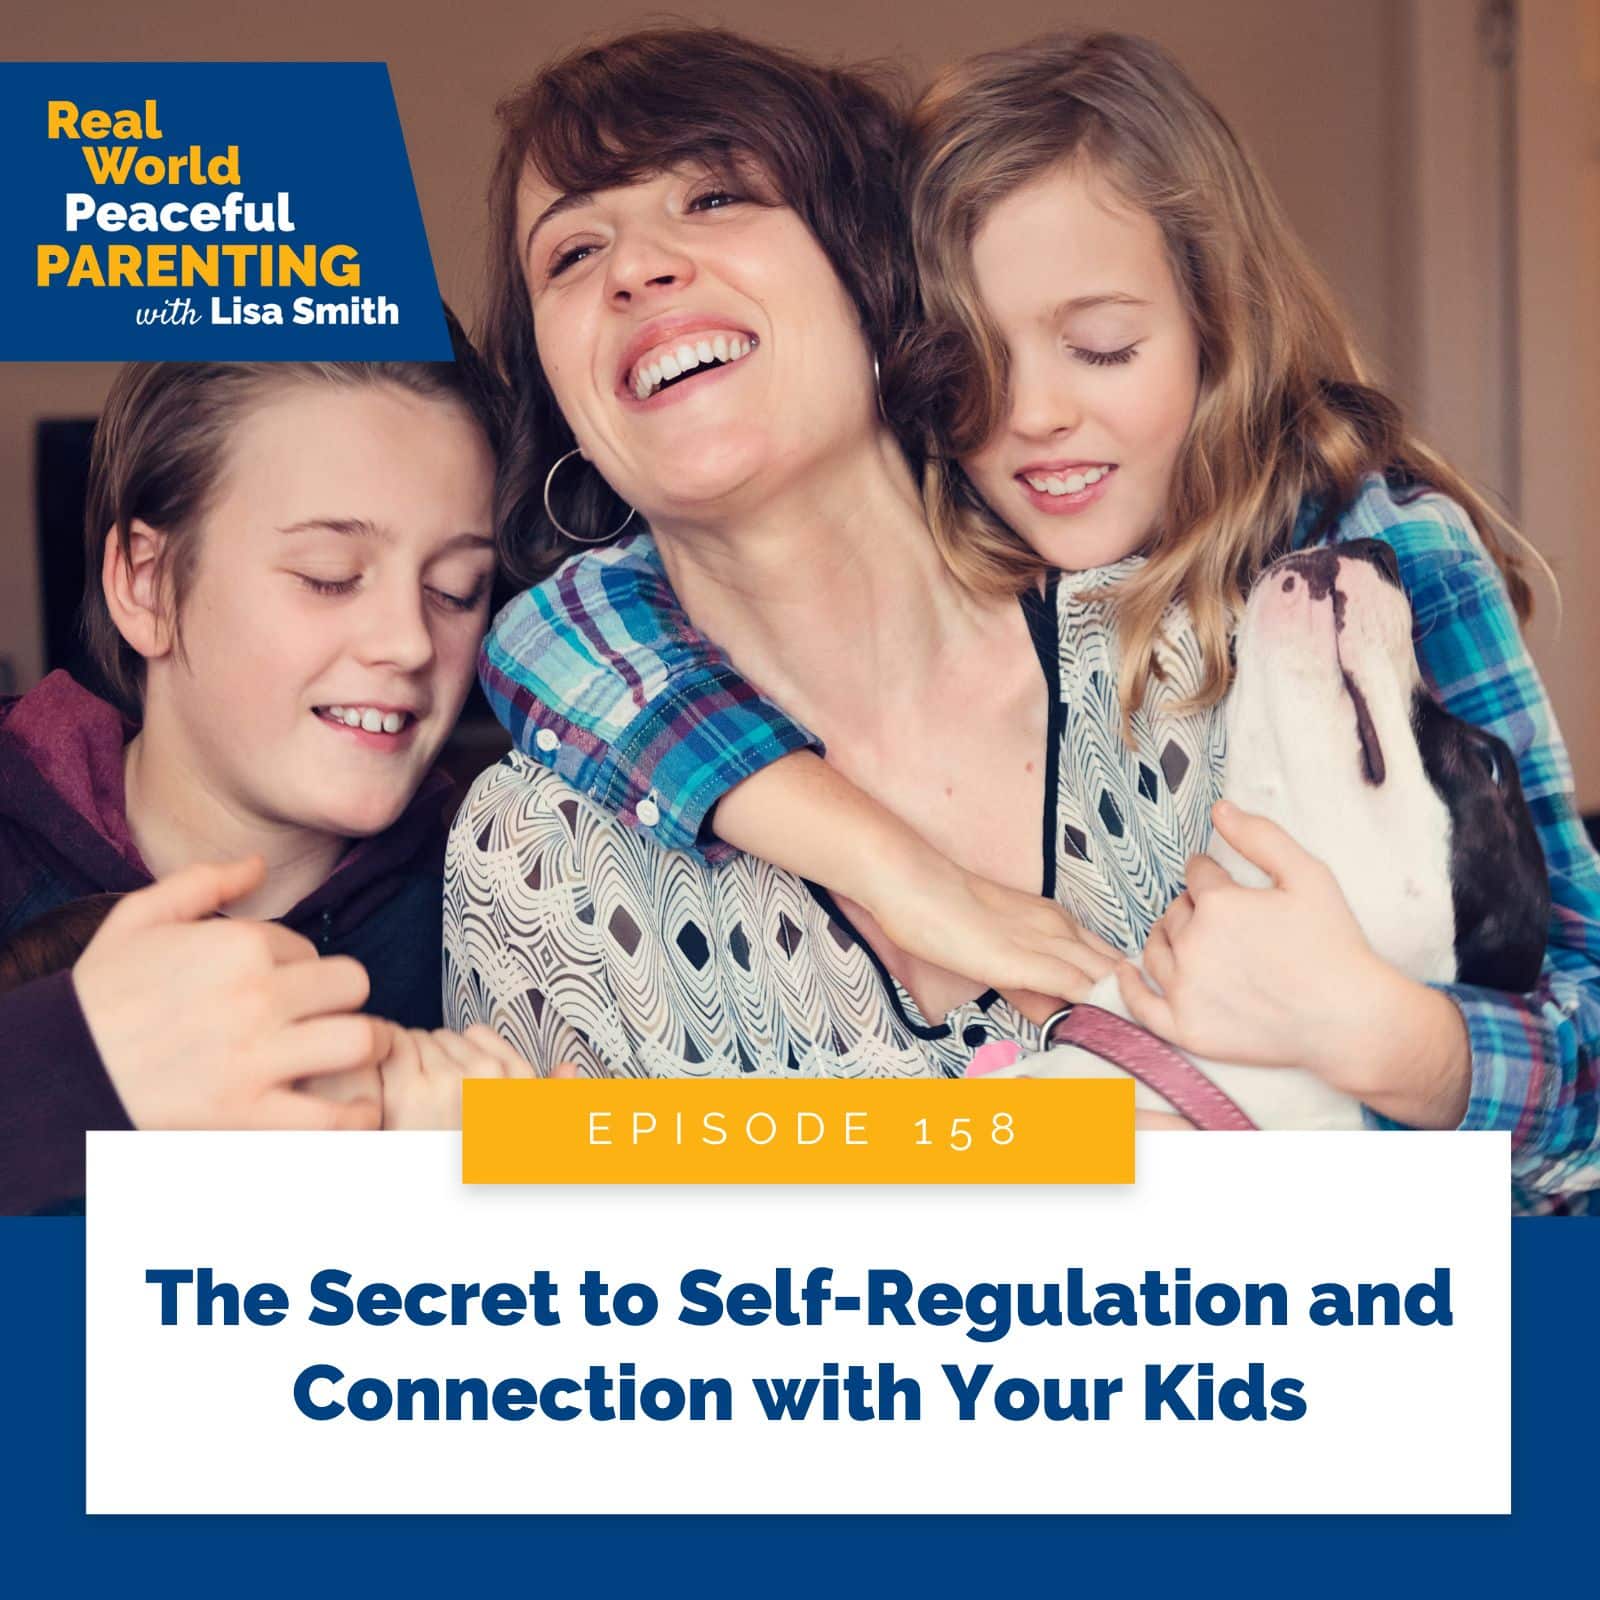 Real World Peaceful Parenting with Lisa Smith | The Secret to Self-Regulation and Connection with Your Kids